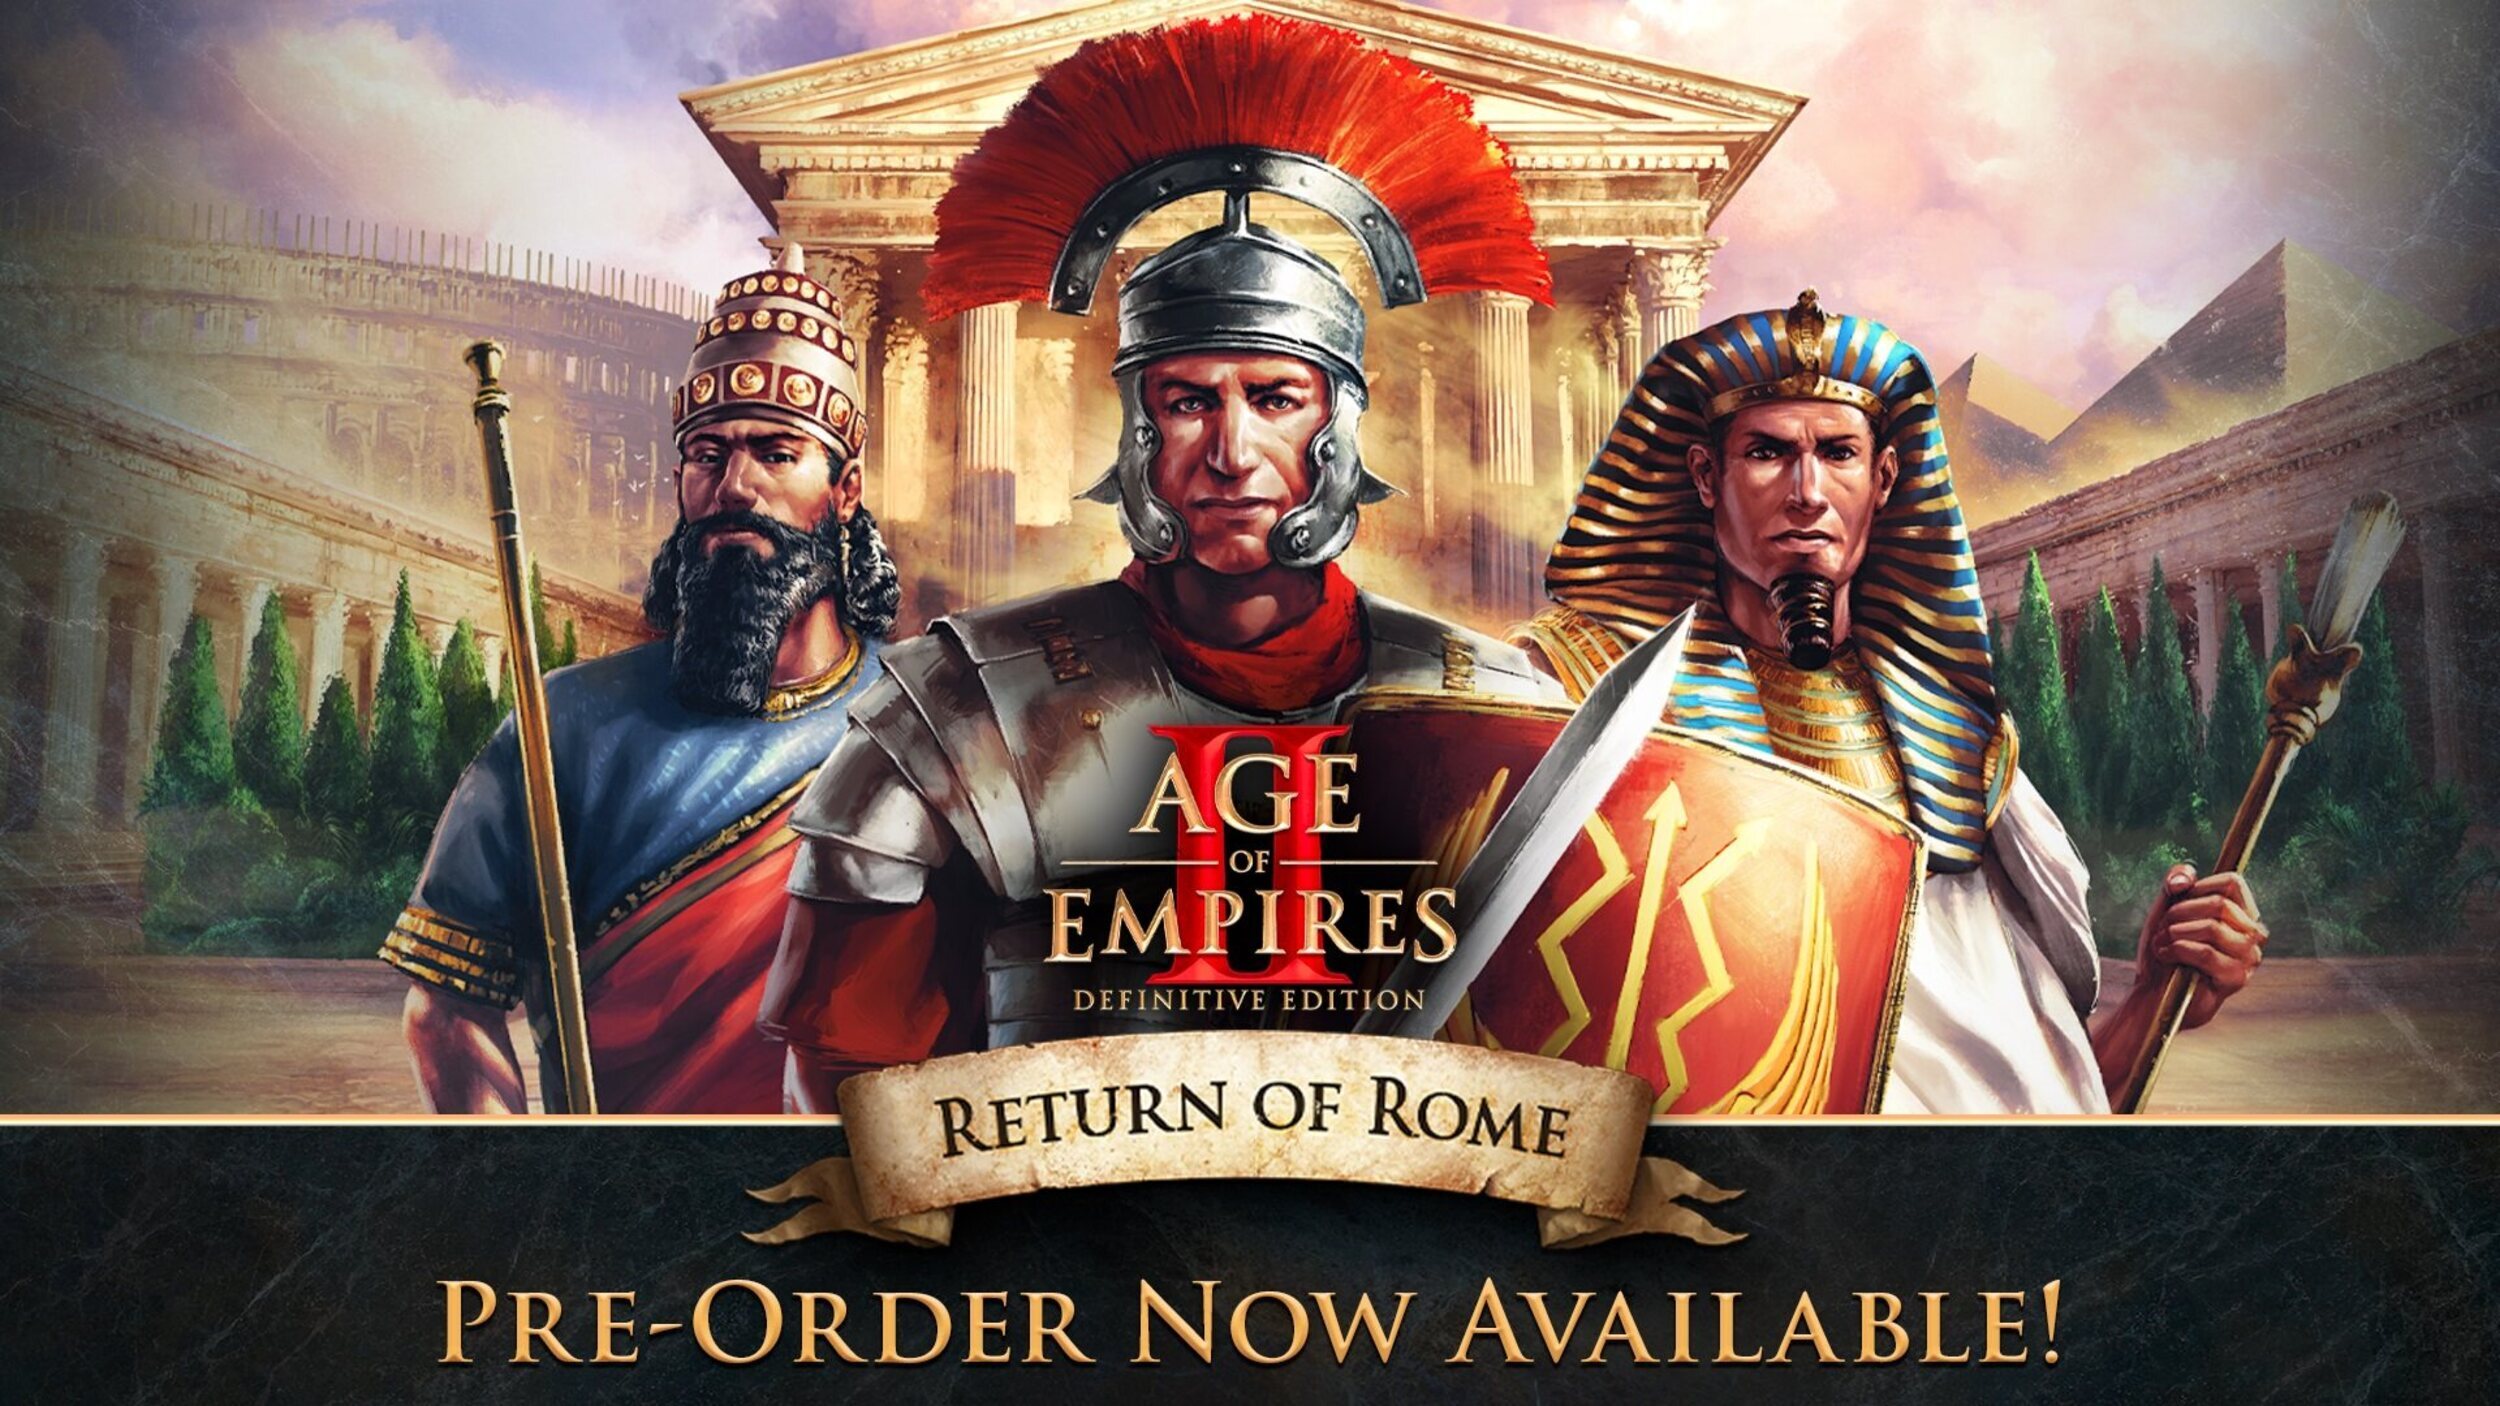 'Age of Empires II: Definitive Edition' - Return of Rome